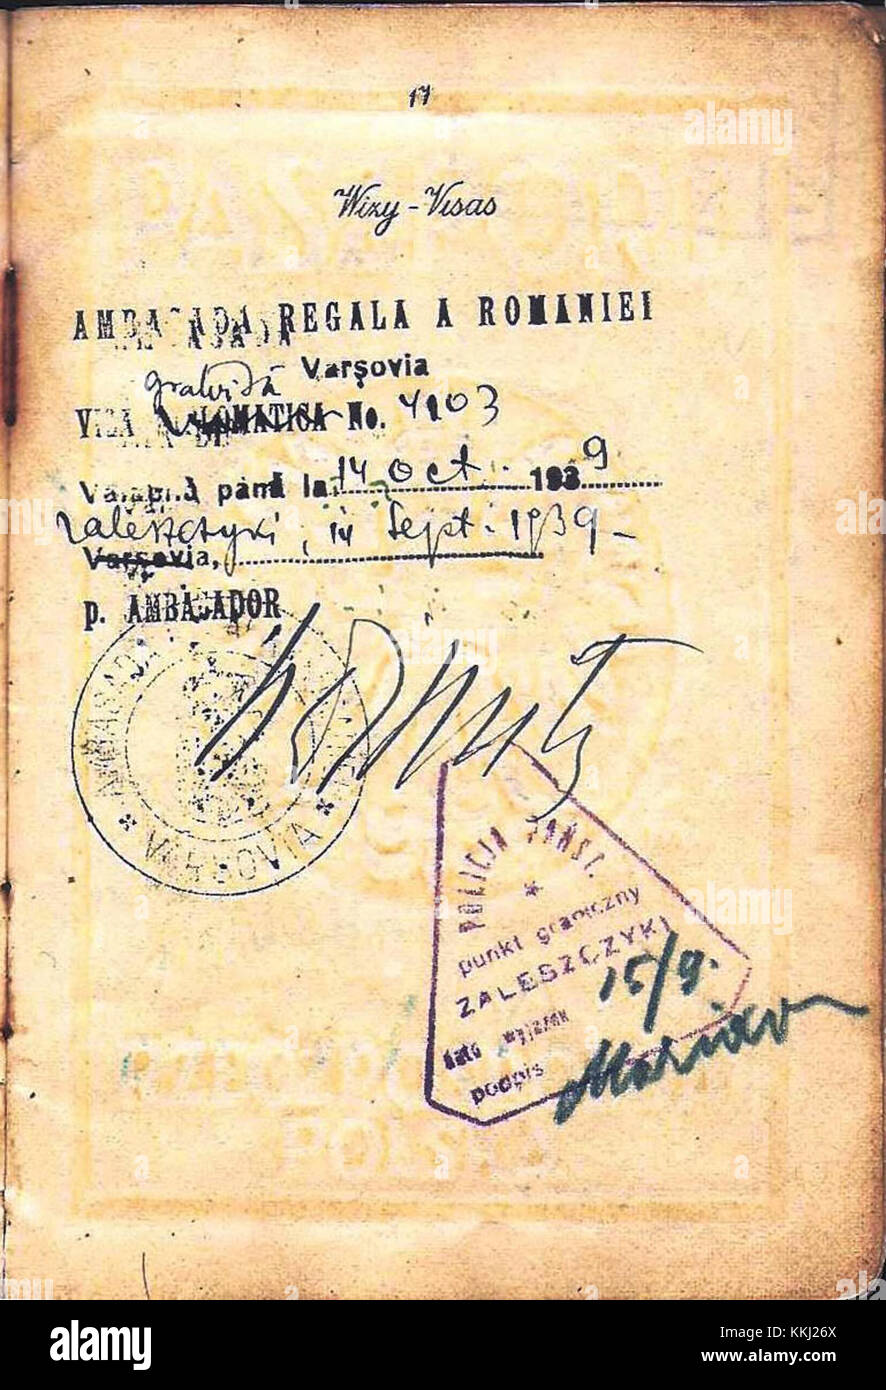 Crossing the border at Zalishchyky into Romania on 15 September 1939, 2 days before the Soviet invasion from the east - passport Stock Photo